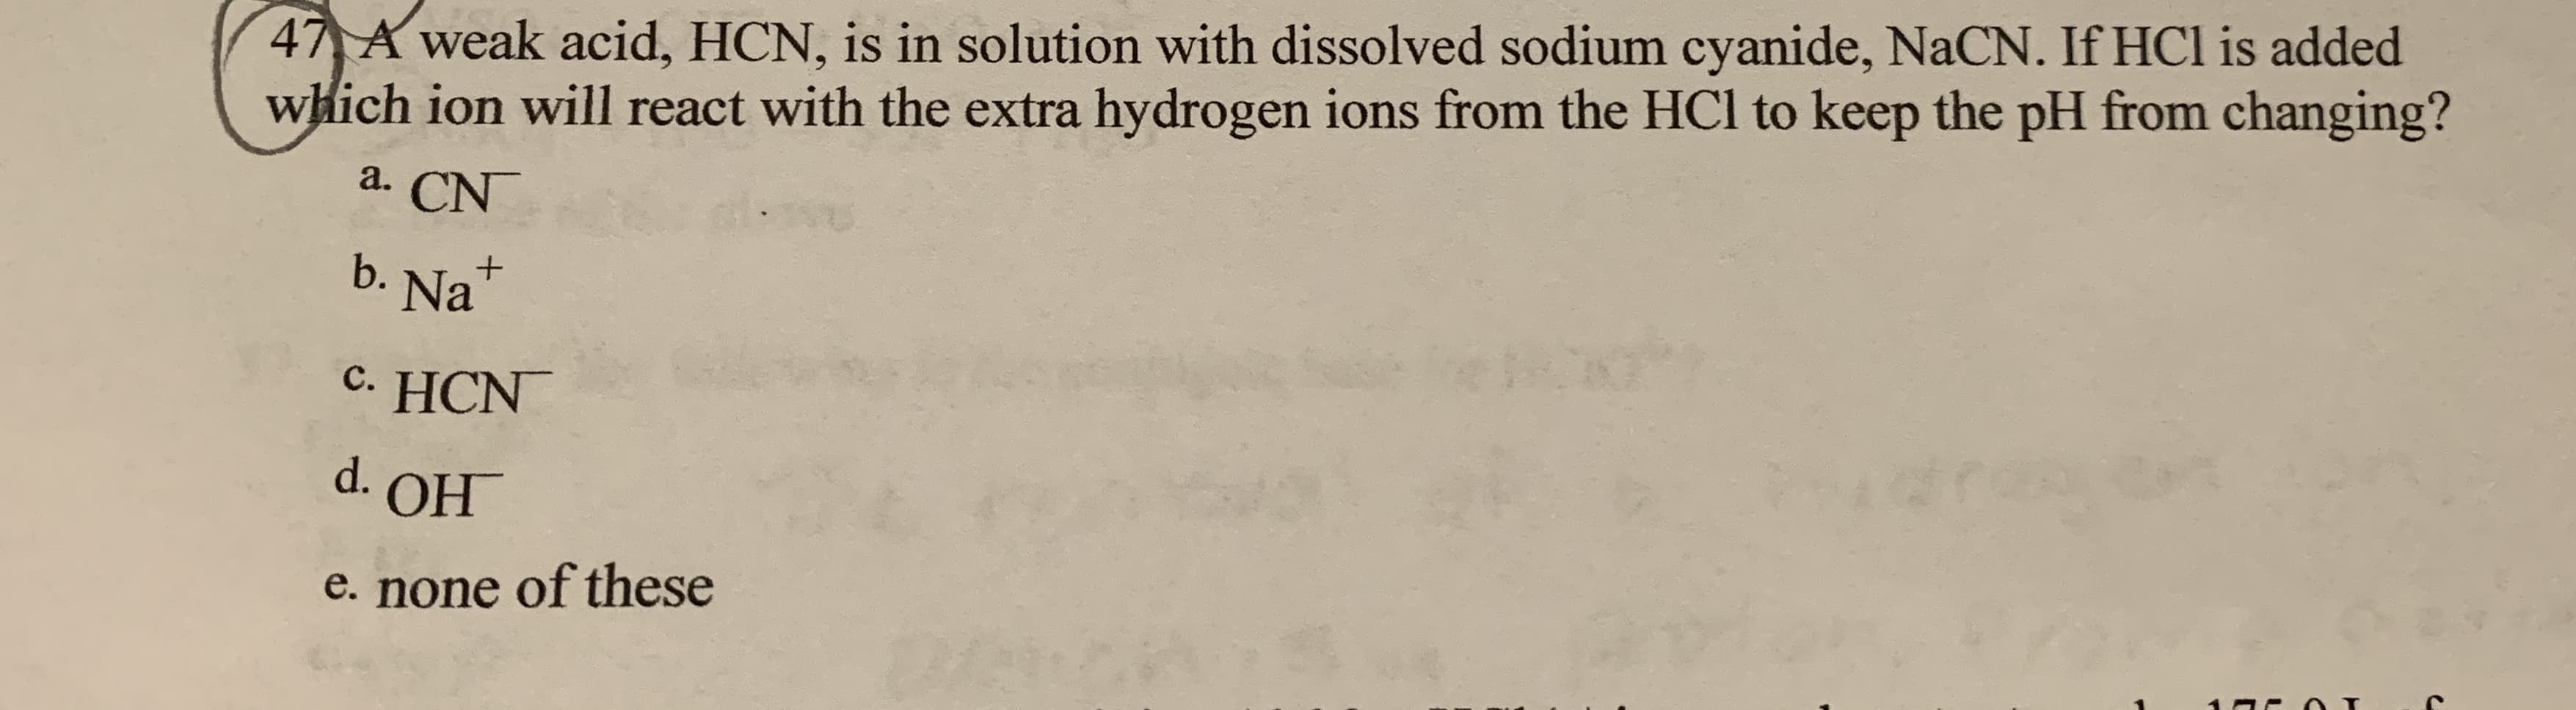 47 A weak acid, HCN, is in solution with dissolved sodium cyanide, NaCN. If HCl is added
which ion will react with the extra hydrogen ions from the HCl to keep the pH from changing?
a. CN
b. Nat
c. HCN
d. OH
e. none of these
